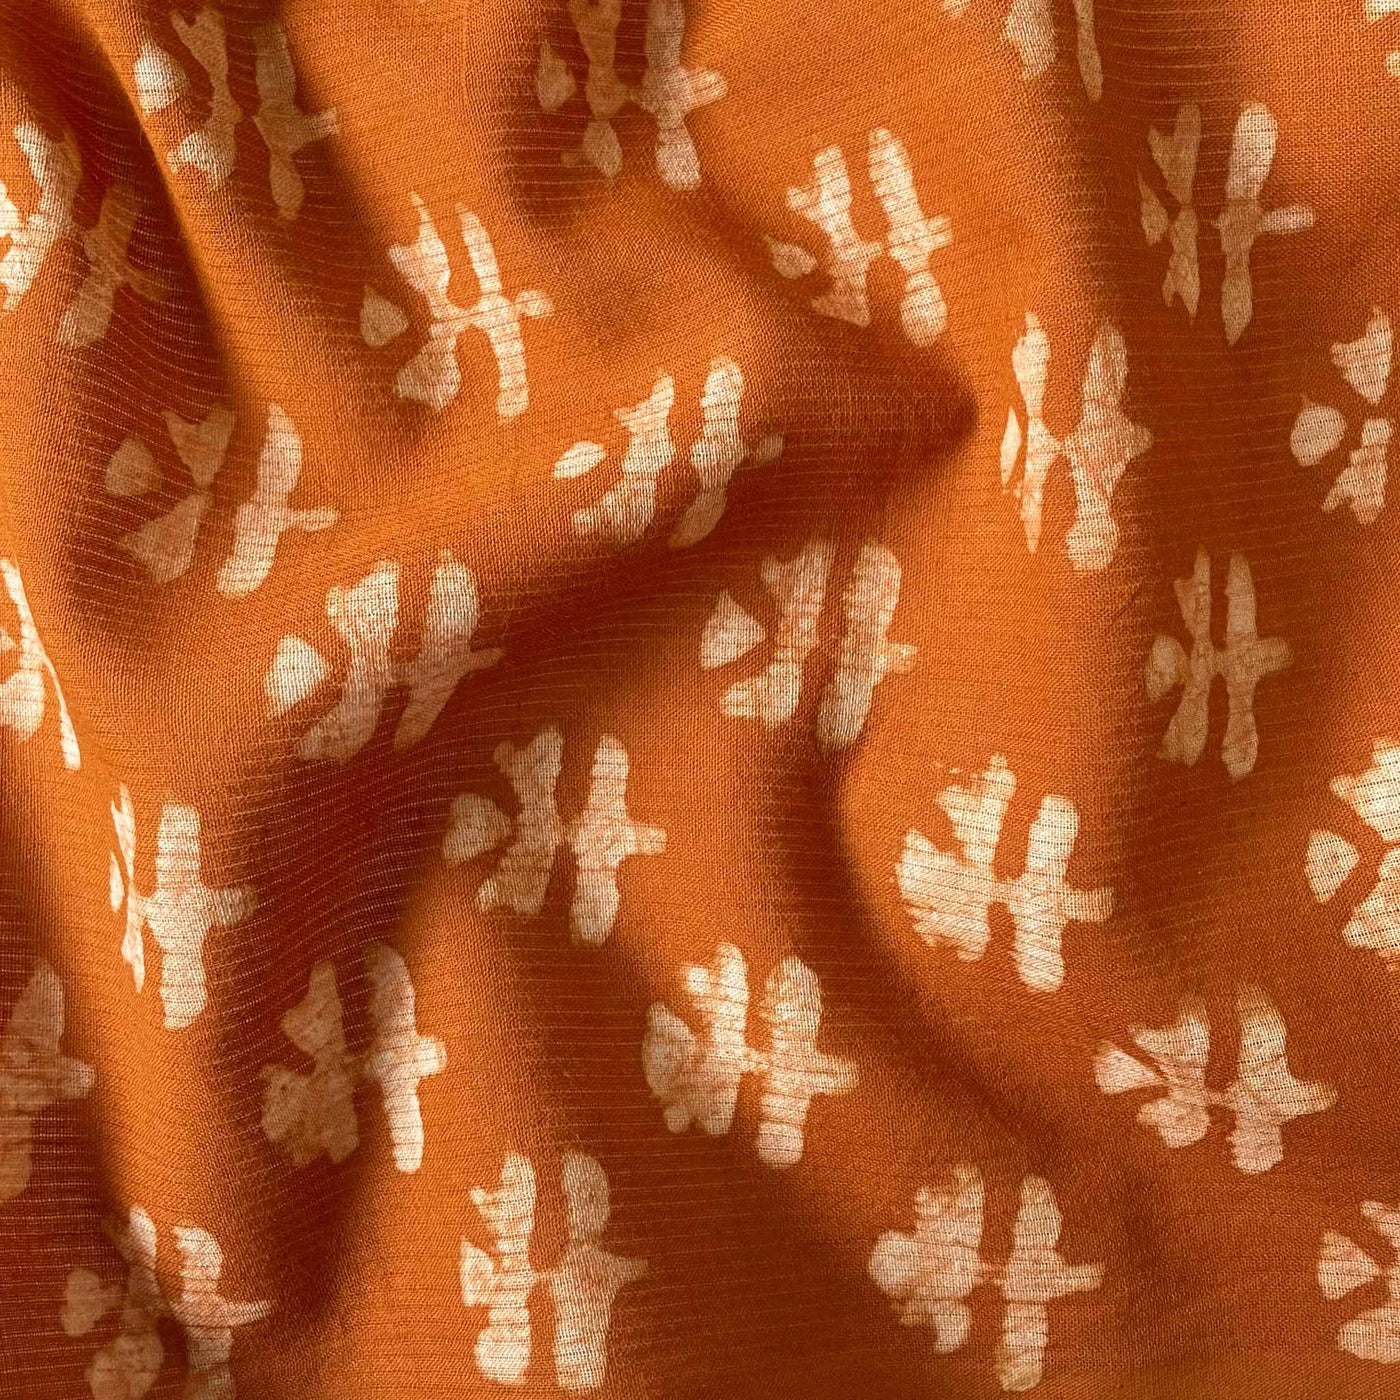 Fabric Pandit Fabric Dusty Mustard Abstract Floral Hand Block Printed Pure Cotton Denting Fabric (Width 42 Inches)